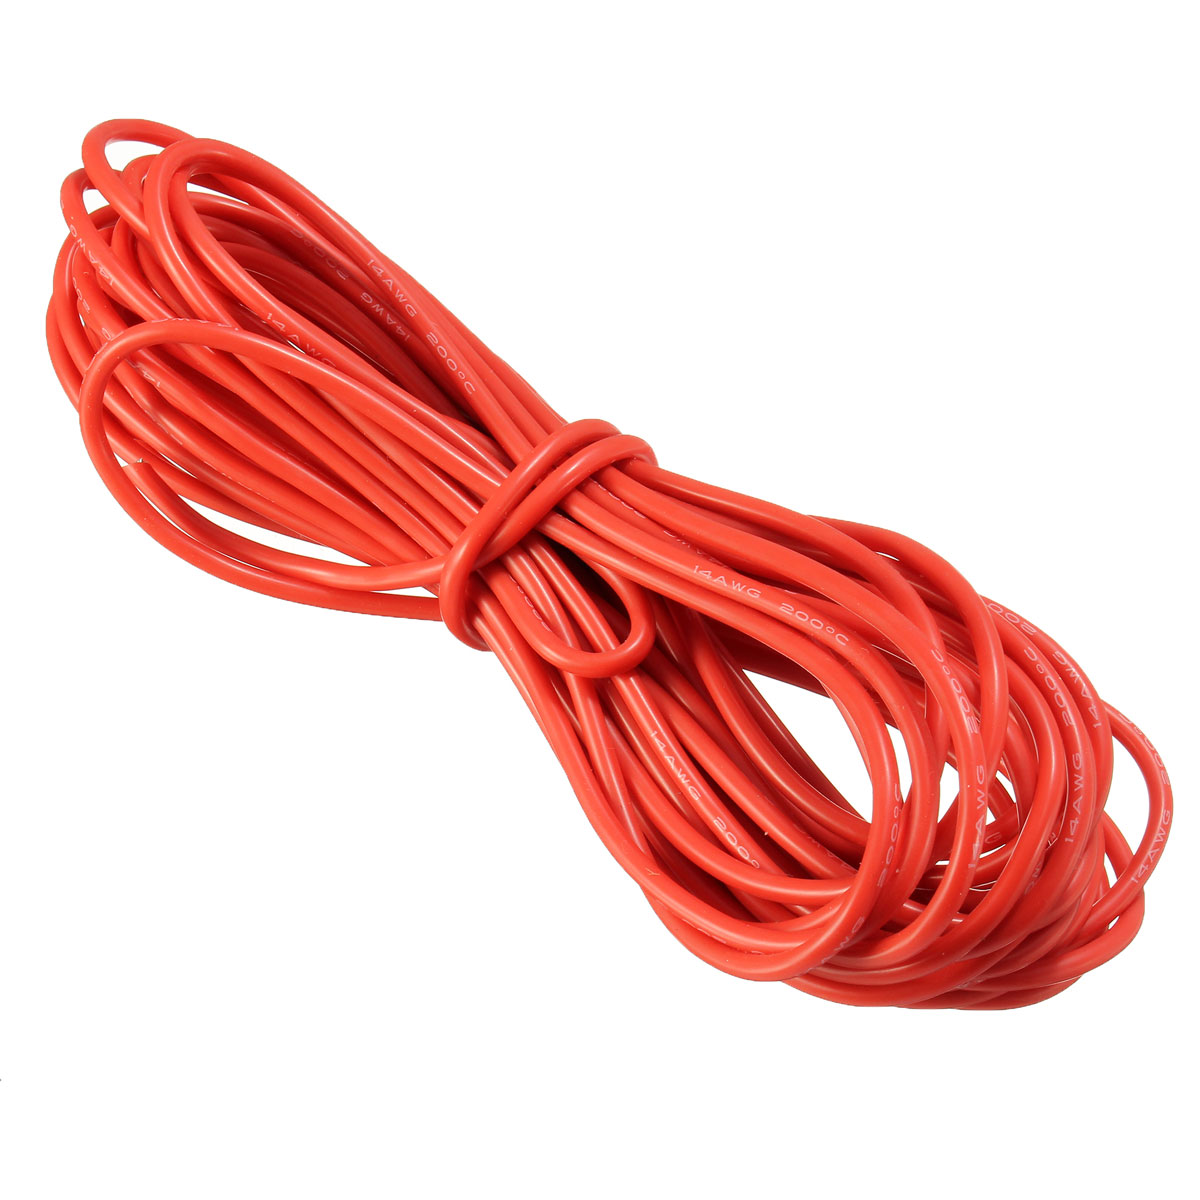 DANIU-10-Meter-Red-Silicone-Wire-Cable-10121416182022AWG-Flexible-Cable-1170297-6